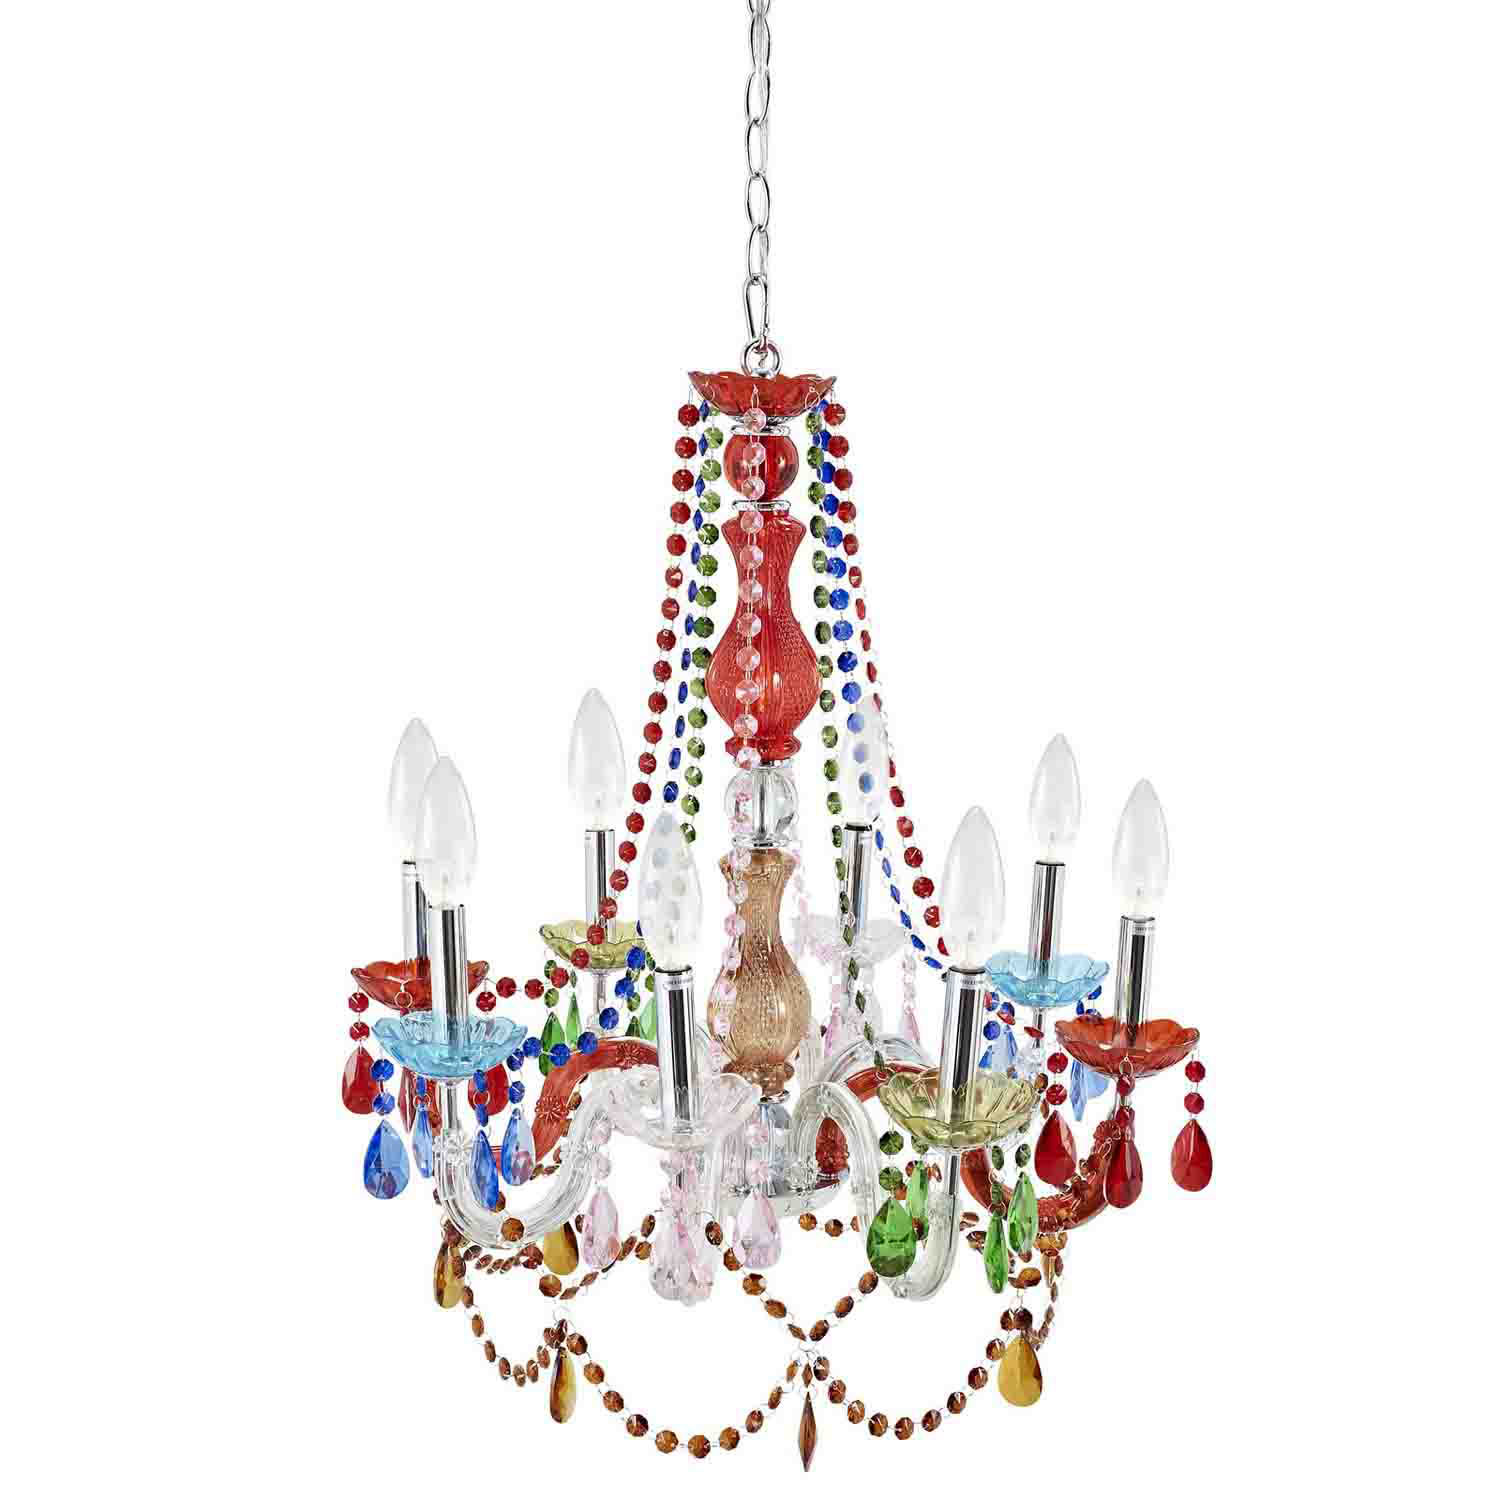 Modway Palace Acrylic Chandelier - Multicolored